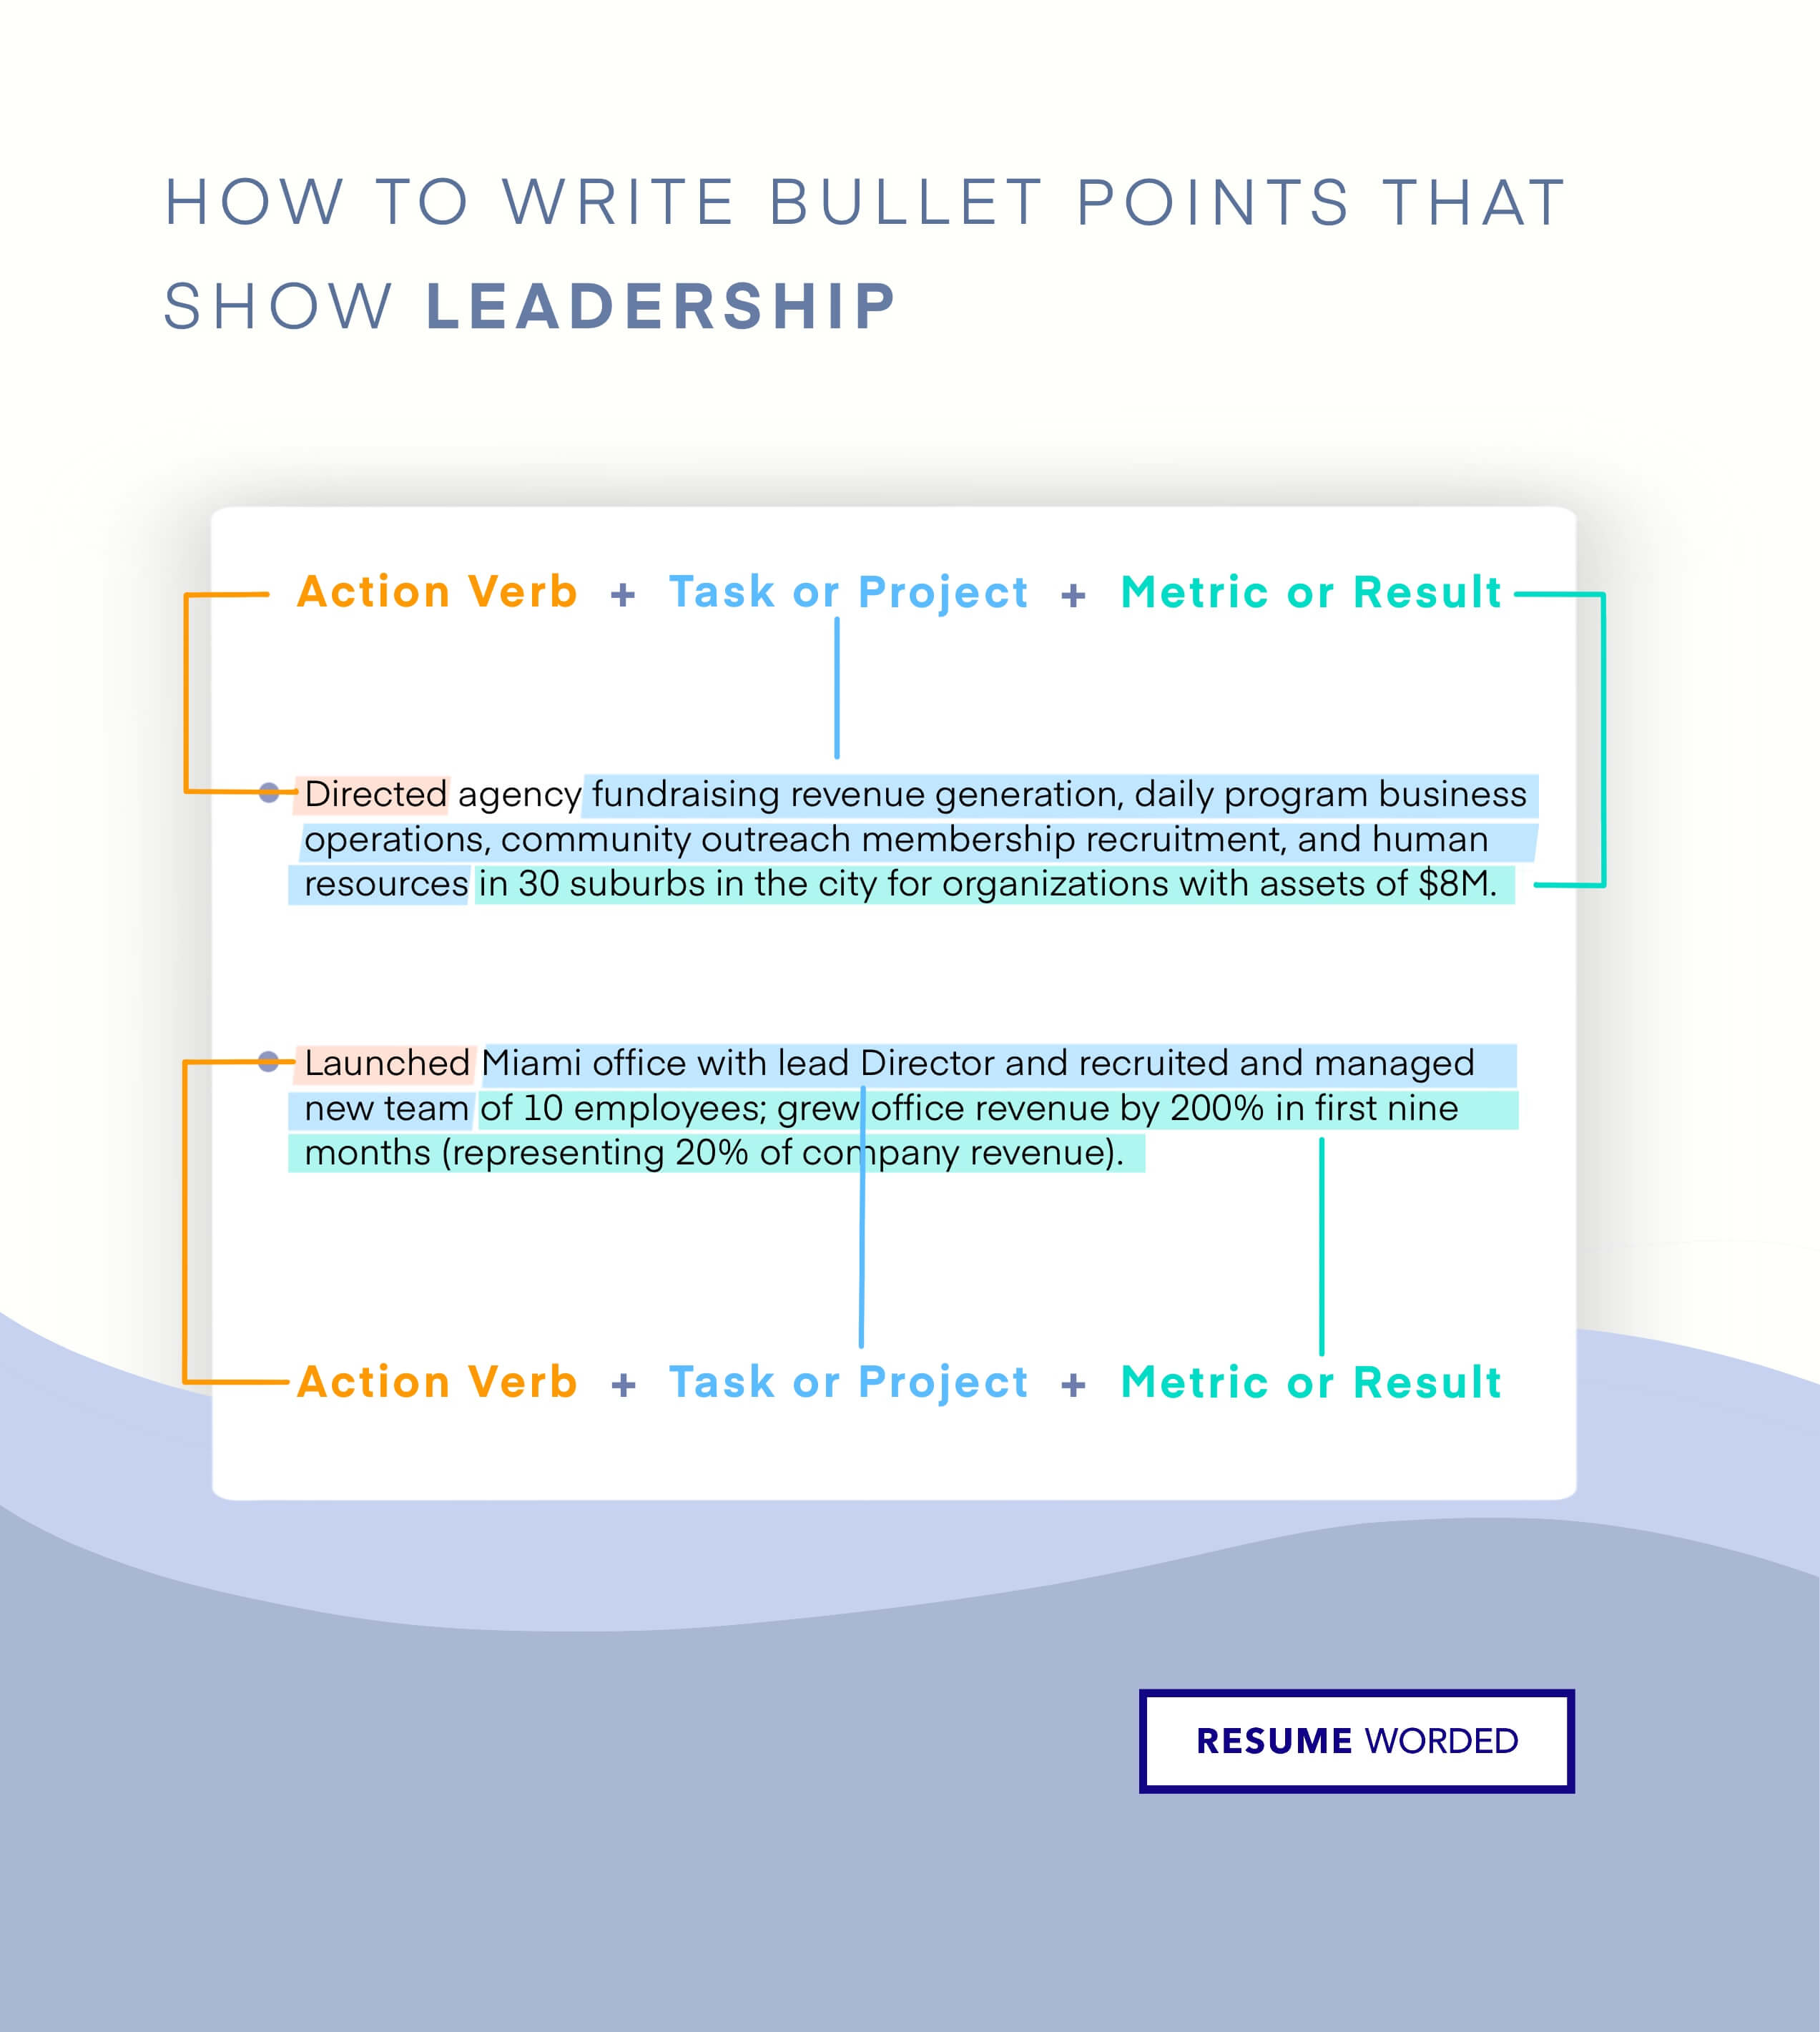 Bullet points feature strong action verbs which stress leadership skills - Retail Manager Resume